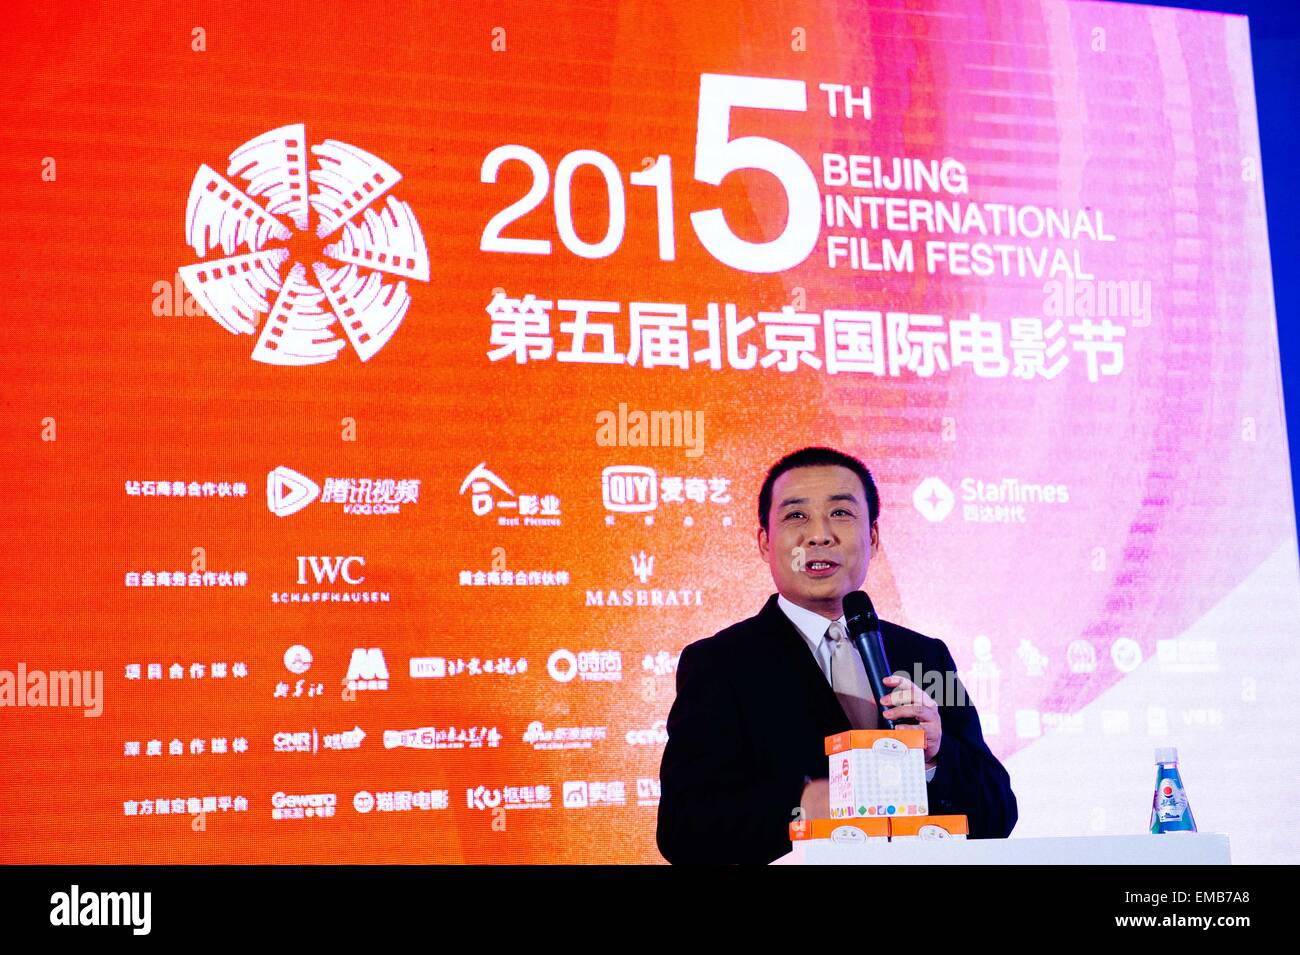 Beijing, China. 19th Apr, 2015. Director Jiang Ping hosts a press conference of China Film Foundation Wu Tianming Film Fund for Young Talents during the fifth Beijing International Film Festival (BJIFF) in Beijing, capital of China, April 19, 2015. Wu Tianming was a leading figure of China's 'Fourth Generation' film directors. His major works include 'Old Well' and 'Life'. © Luo Xiaoguang/Xinhua/Alamy Live News Stock Photo